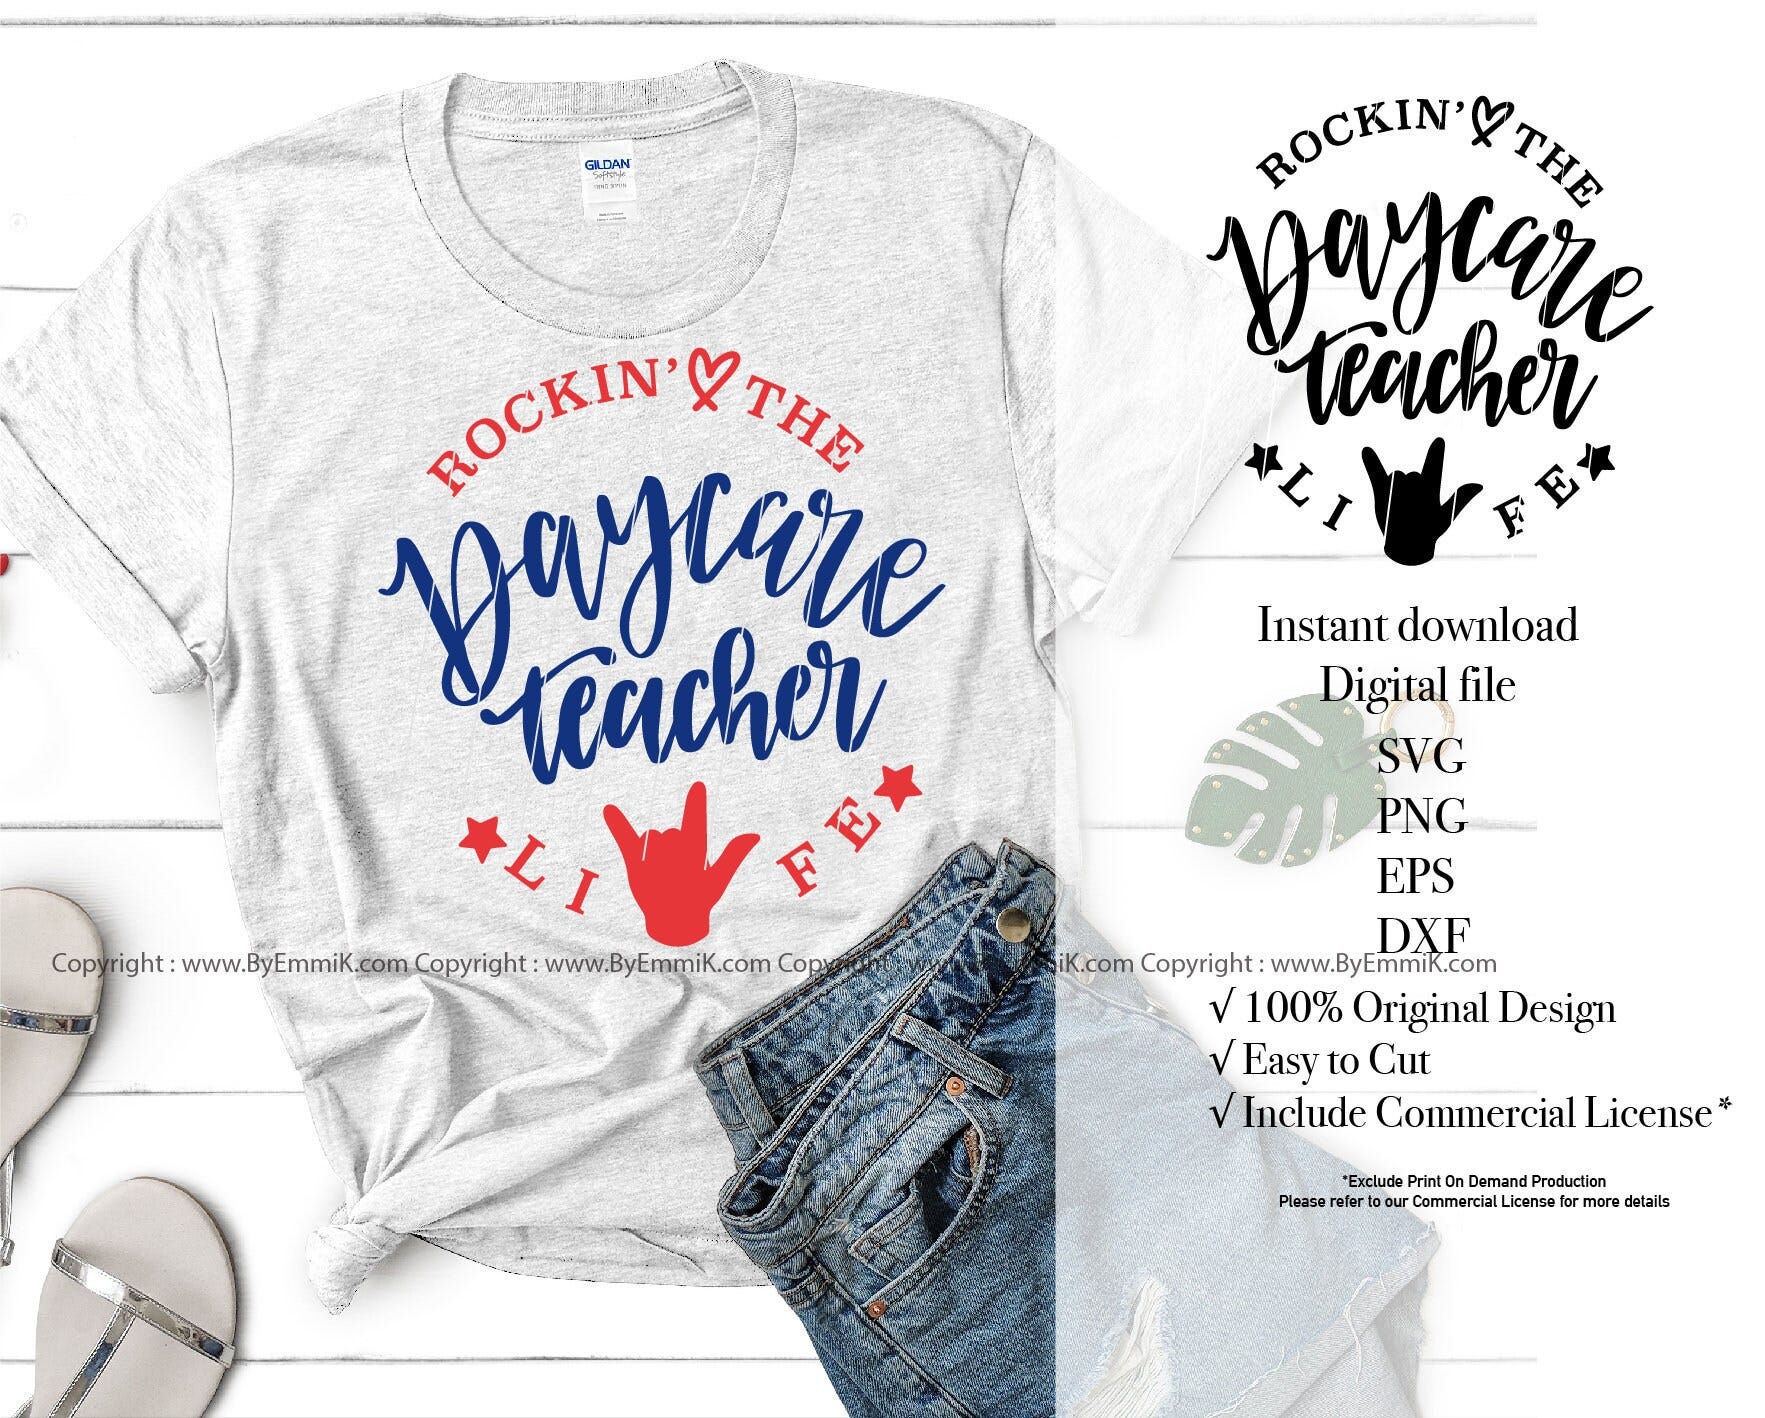 daycare teacher svg, daycare provider. instant download svg,png,eps,dxf files, free commercial for t shirt, decal, stencil, vinyl iron on